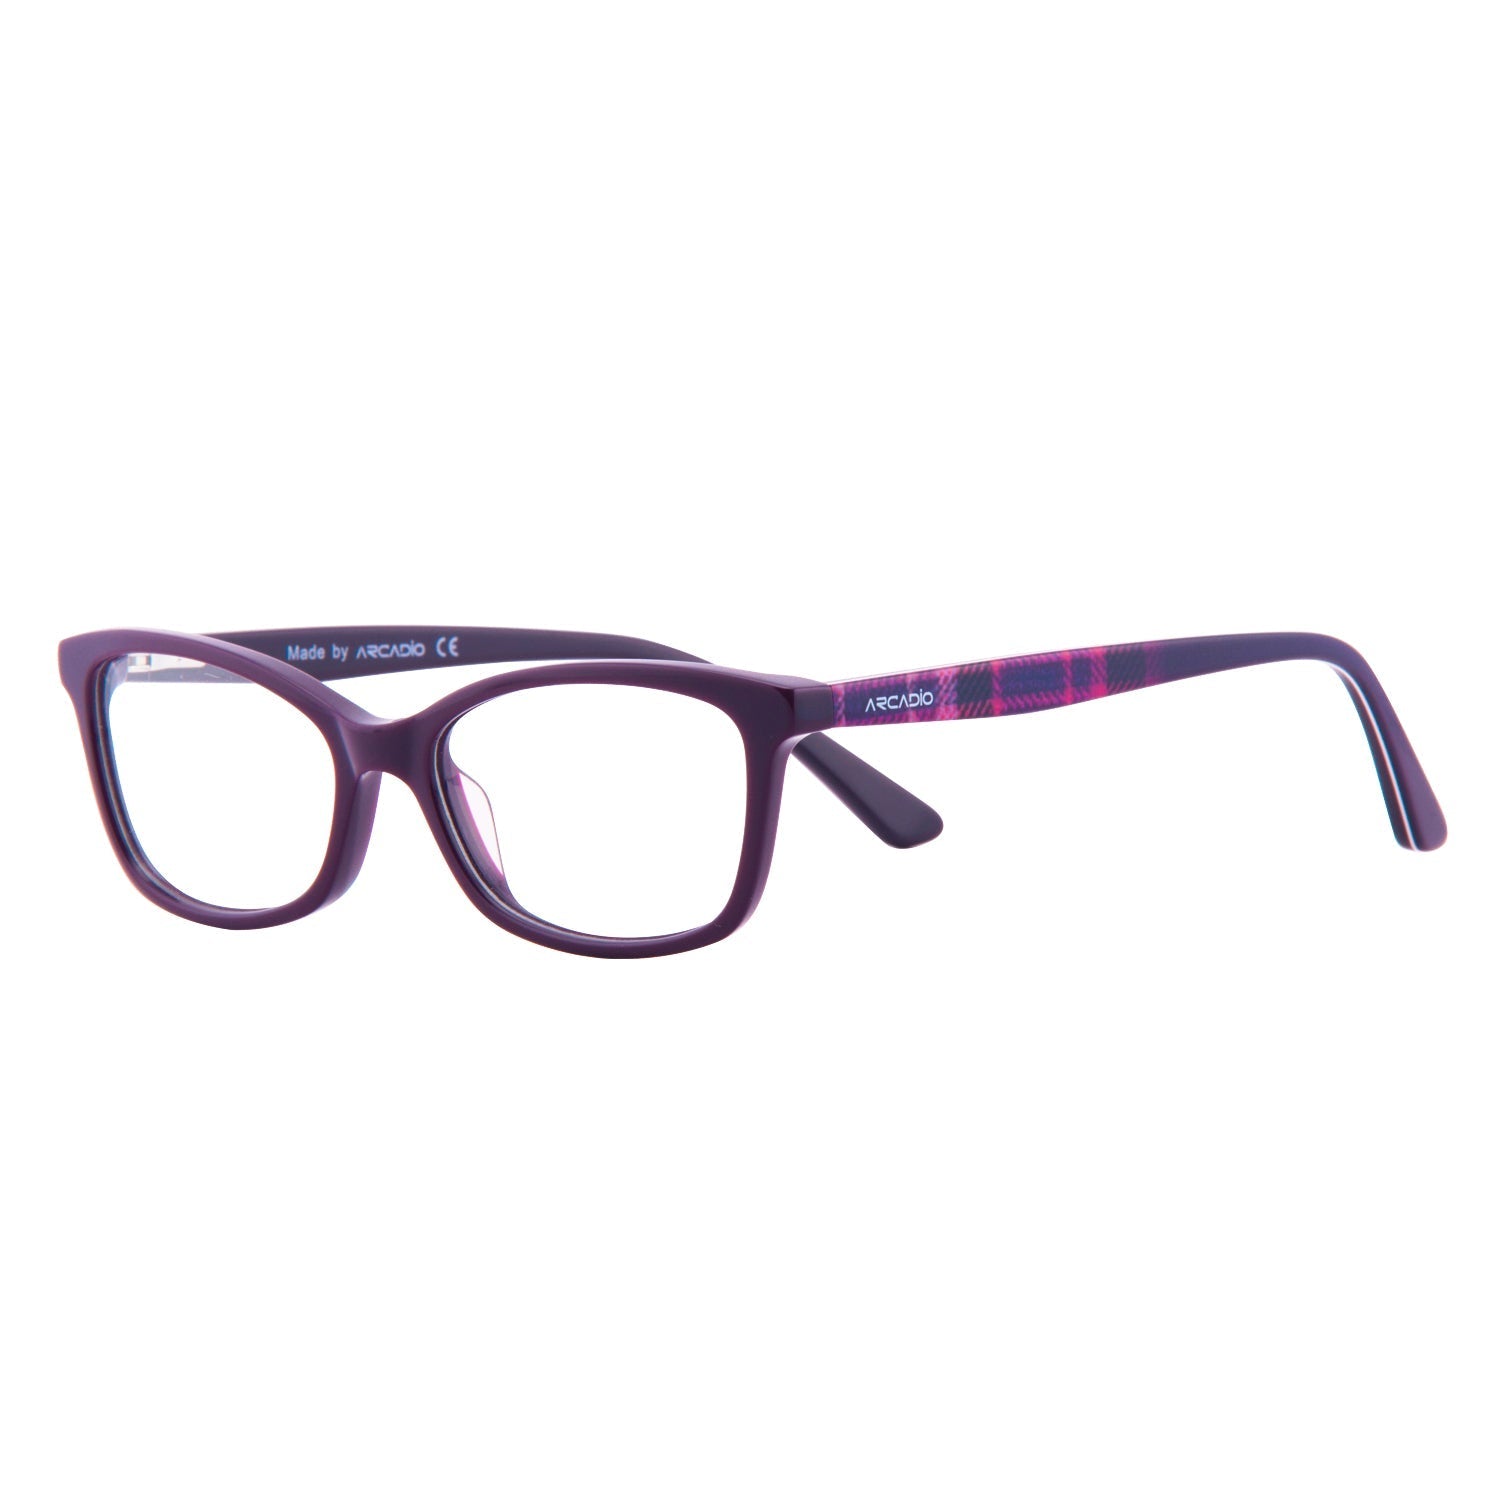 AUDREY Modified Cat-eye Frame for women SF497 ARCADIO